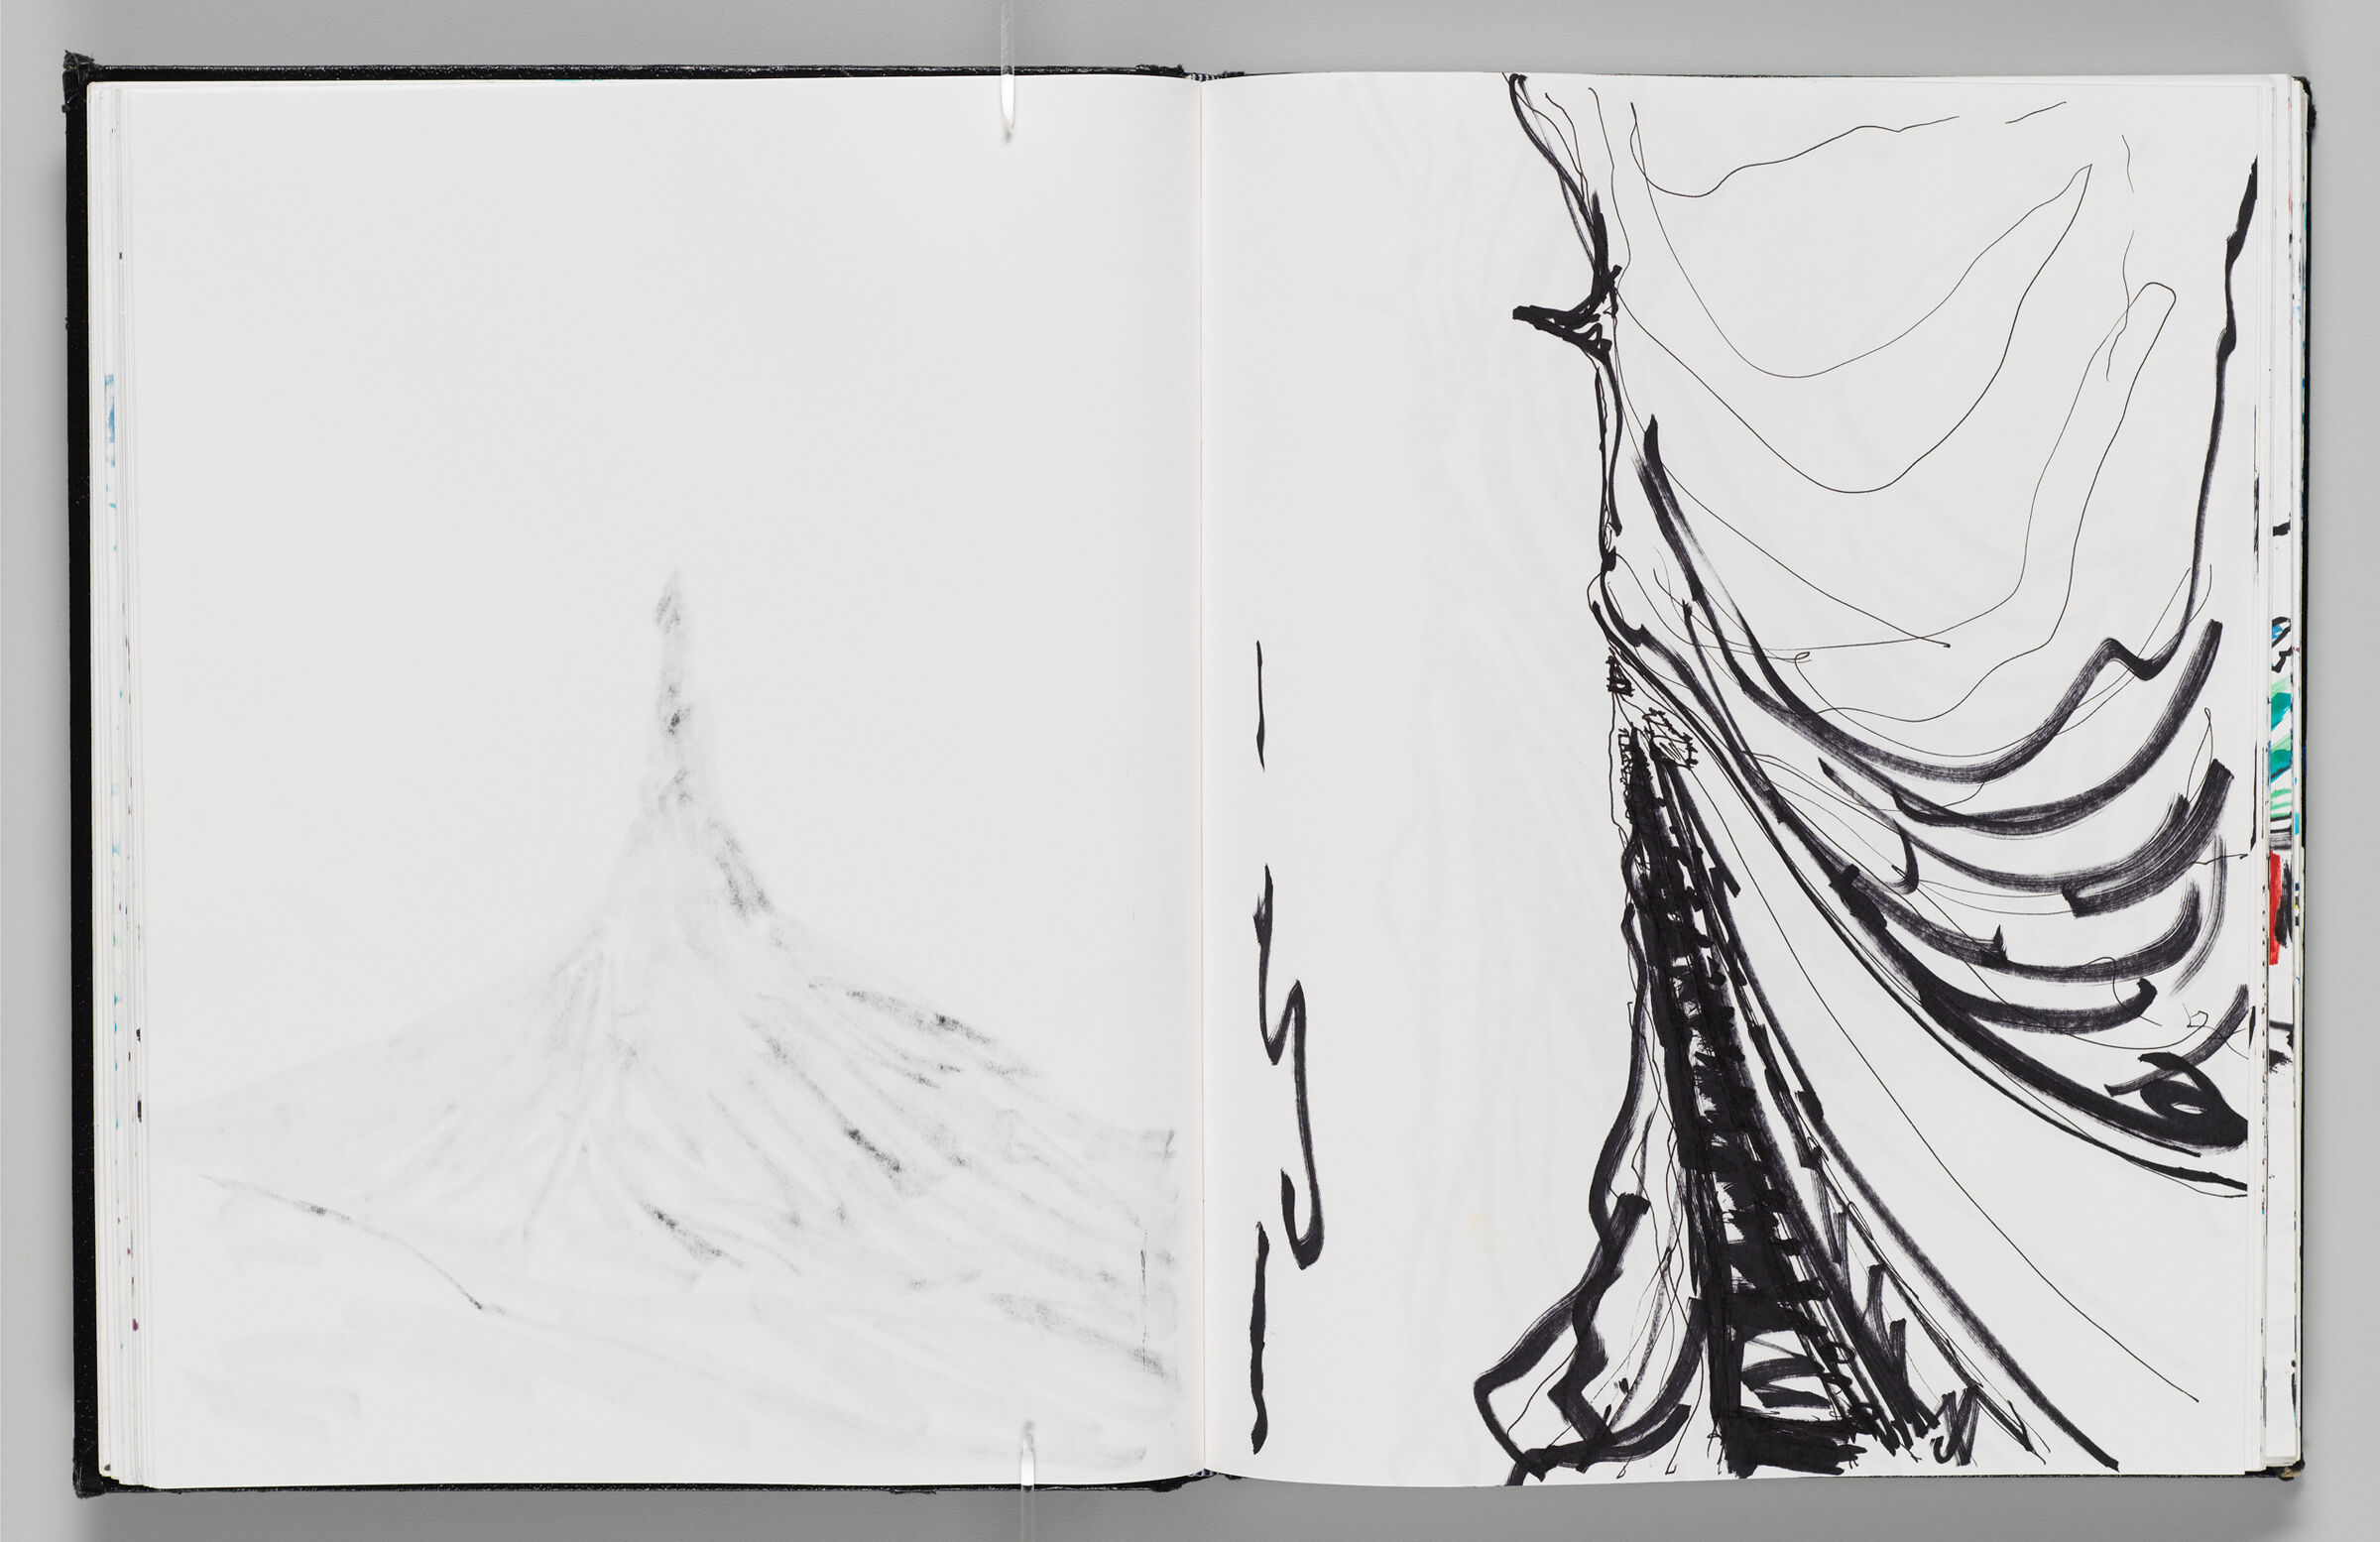 Untitled (Bleed-Through Of Previous Page, Left Page); Untitled (Highway In Landscape, Right Page)